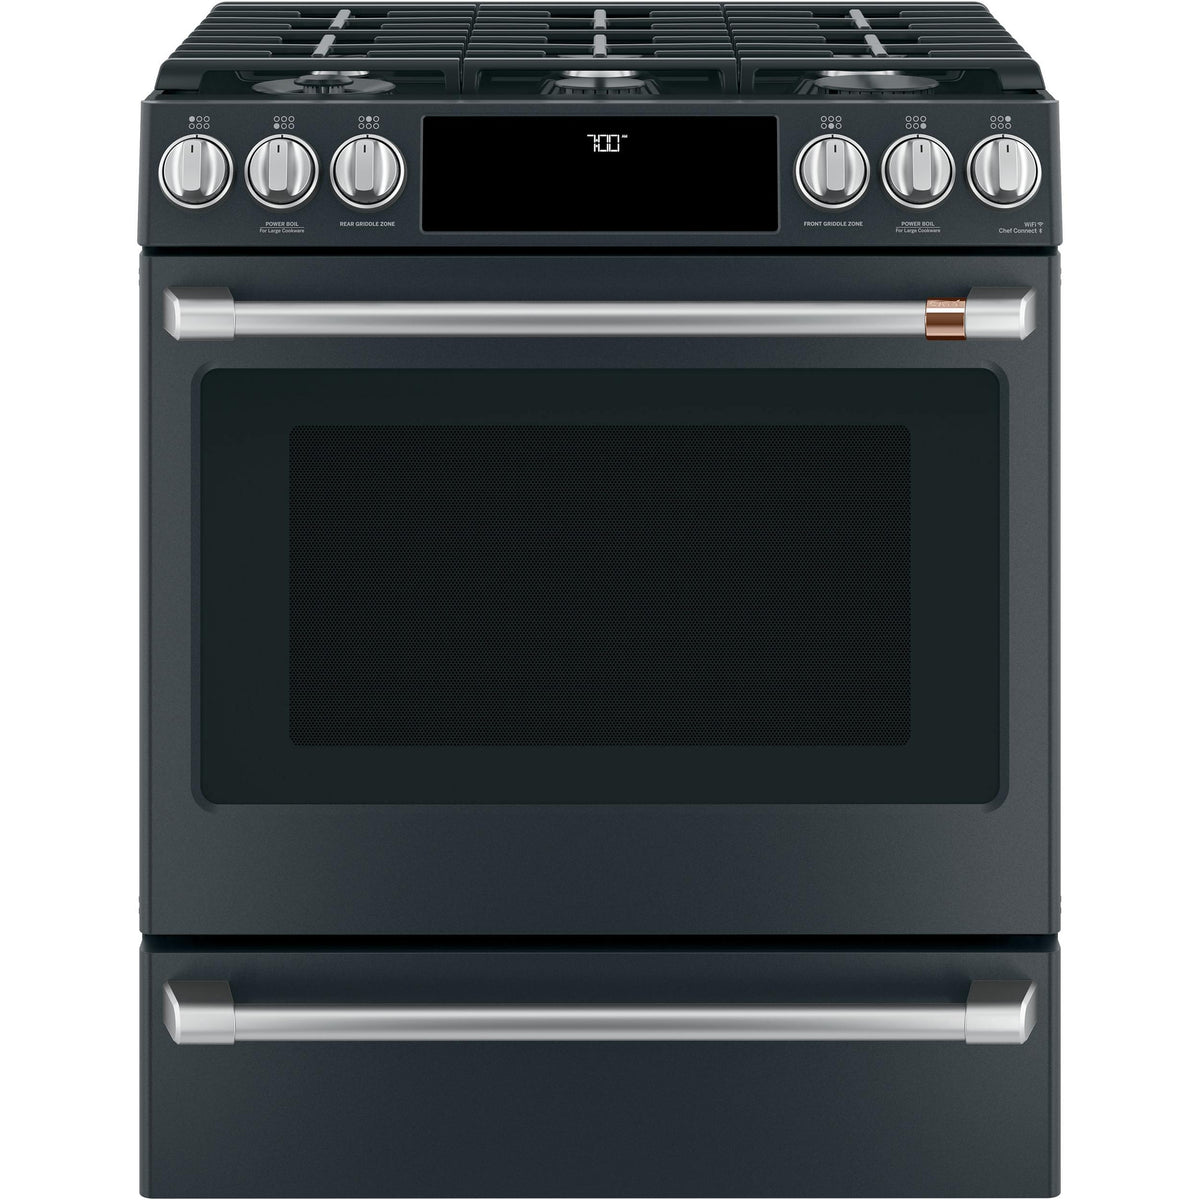 Café 30-inch Slide-In Gas Range with WiFi Connect CCGS700P3MD1 IMAGE 1